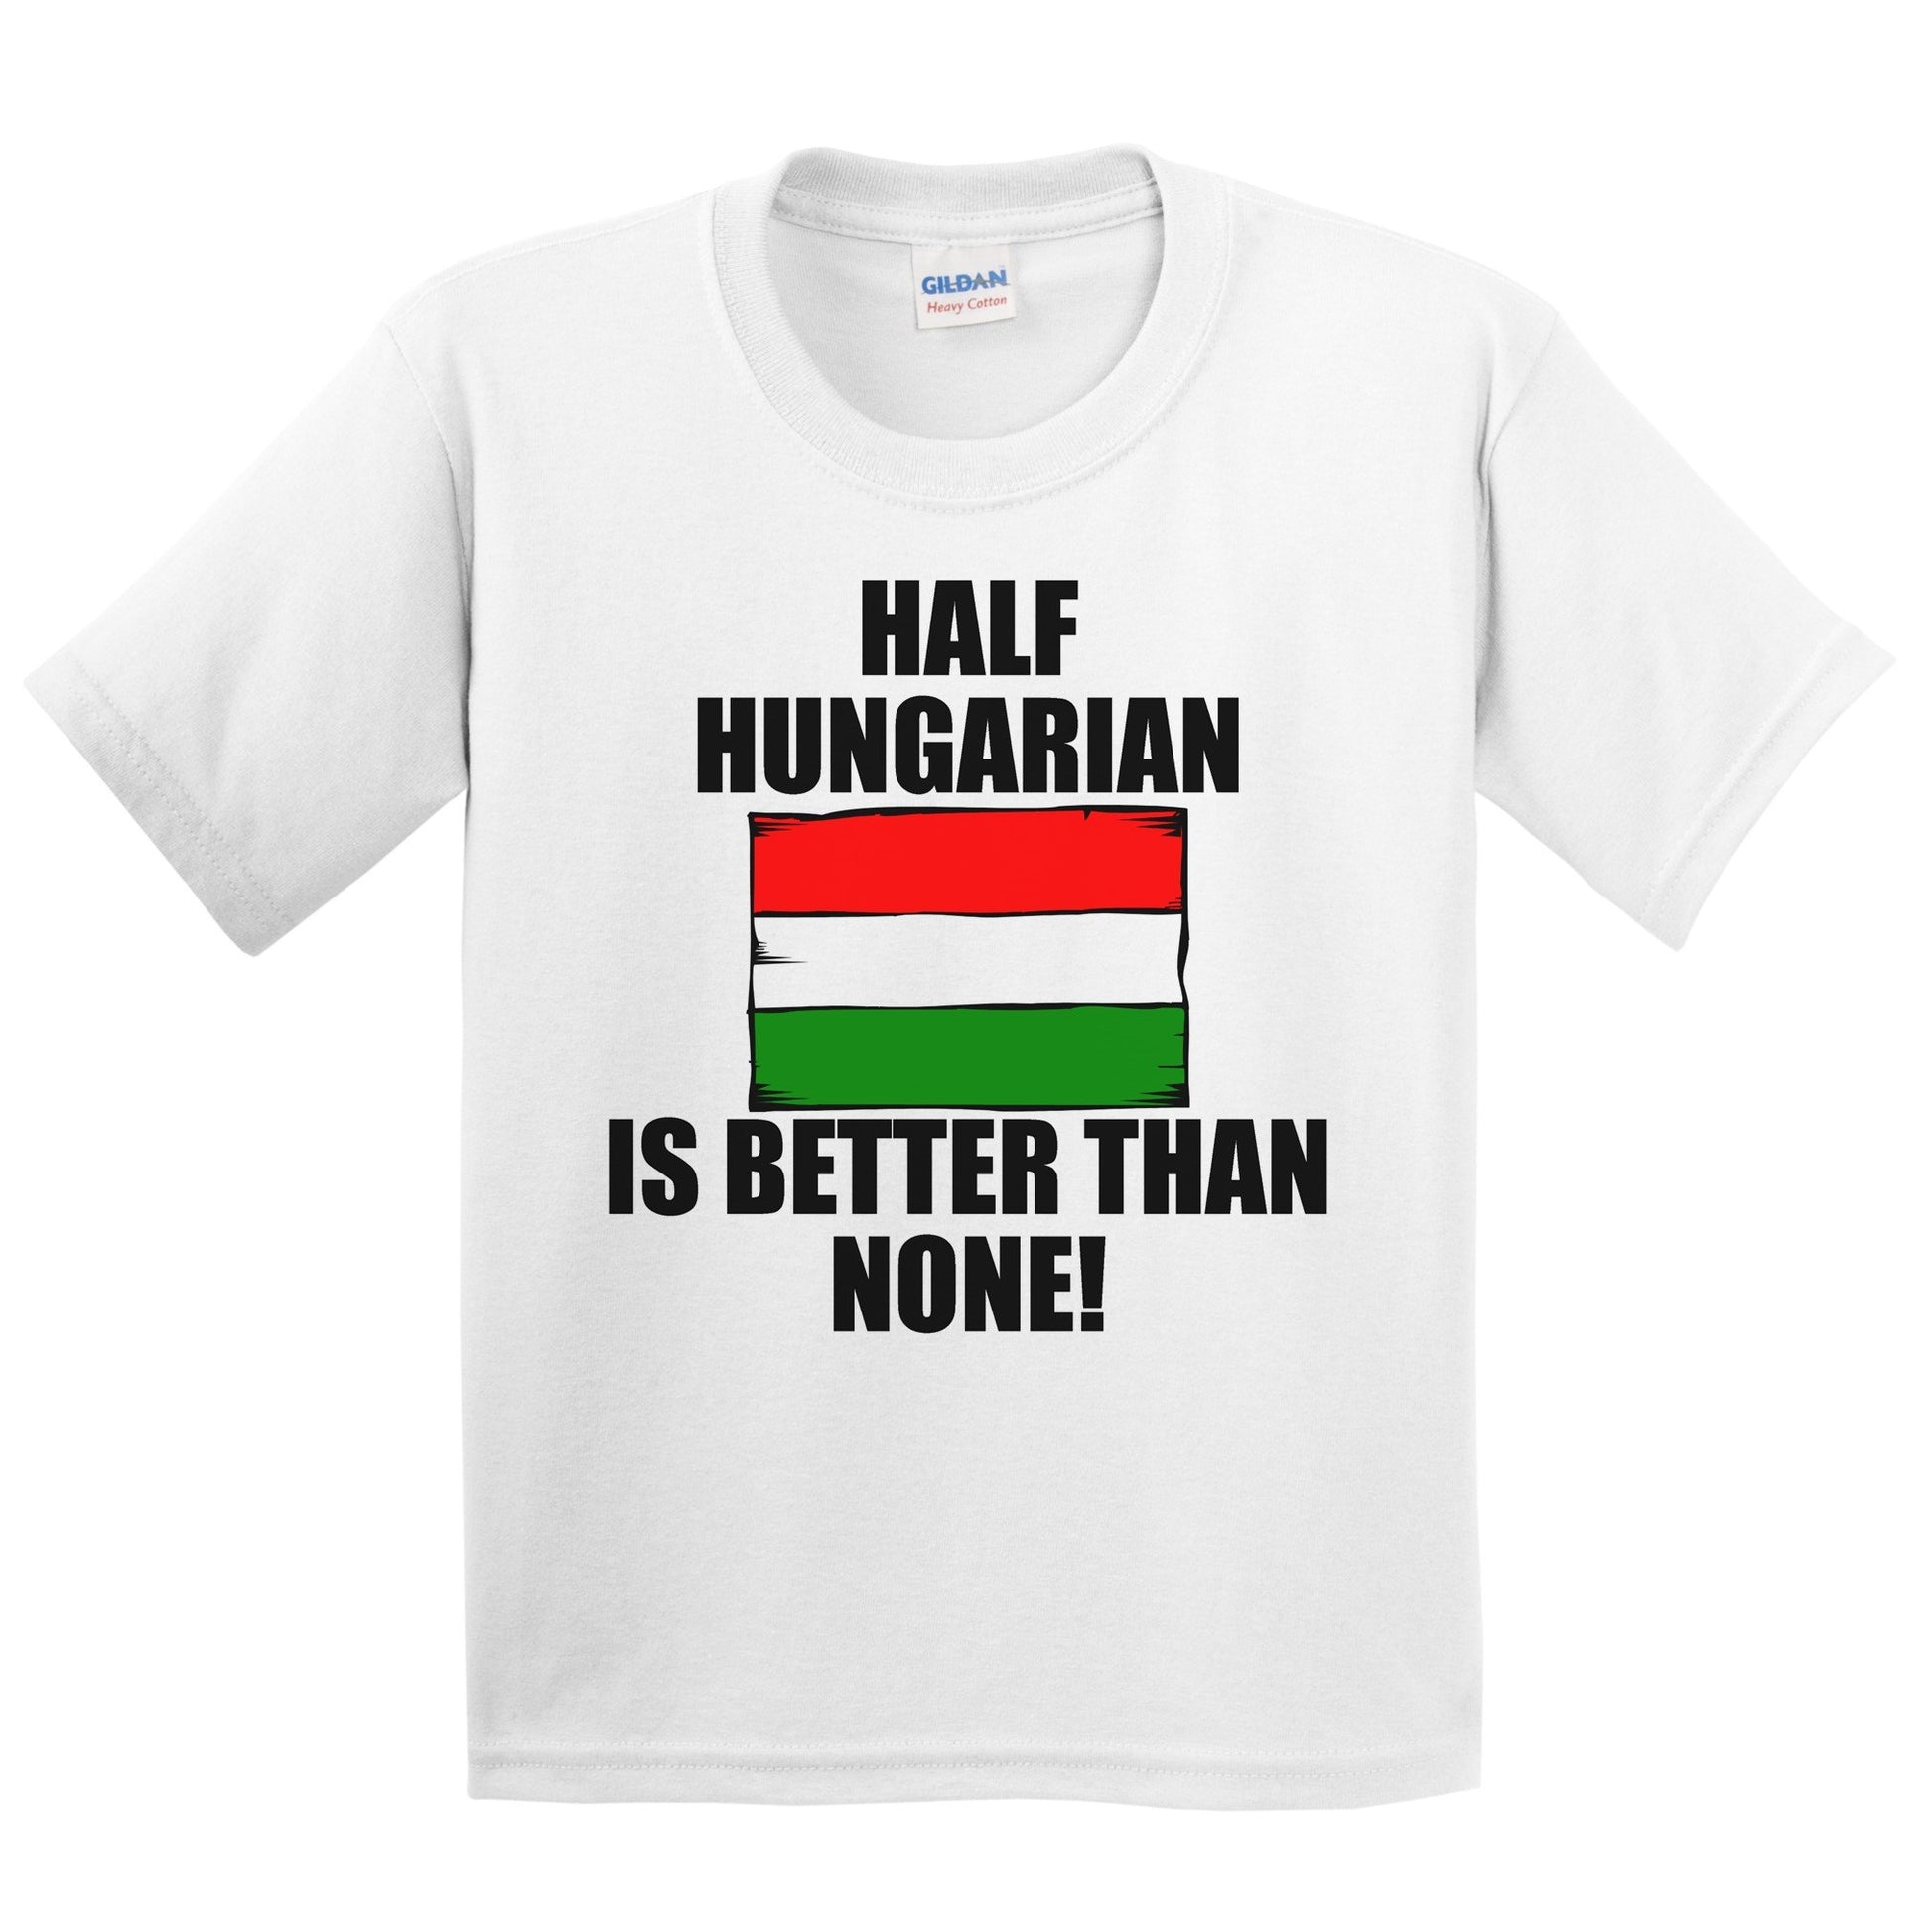 Half Hungarian Is Better Than None Kids Youth T-Shirt